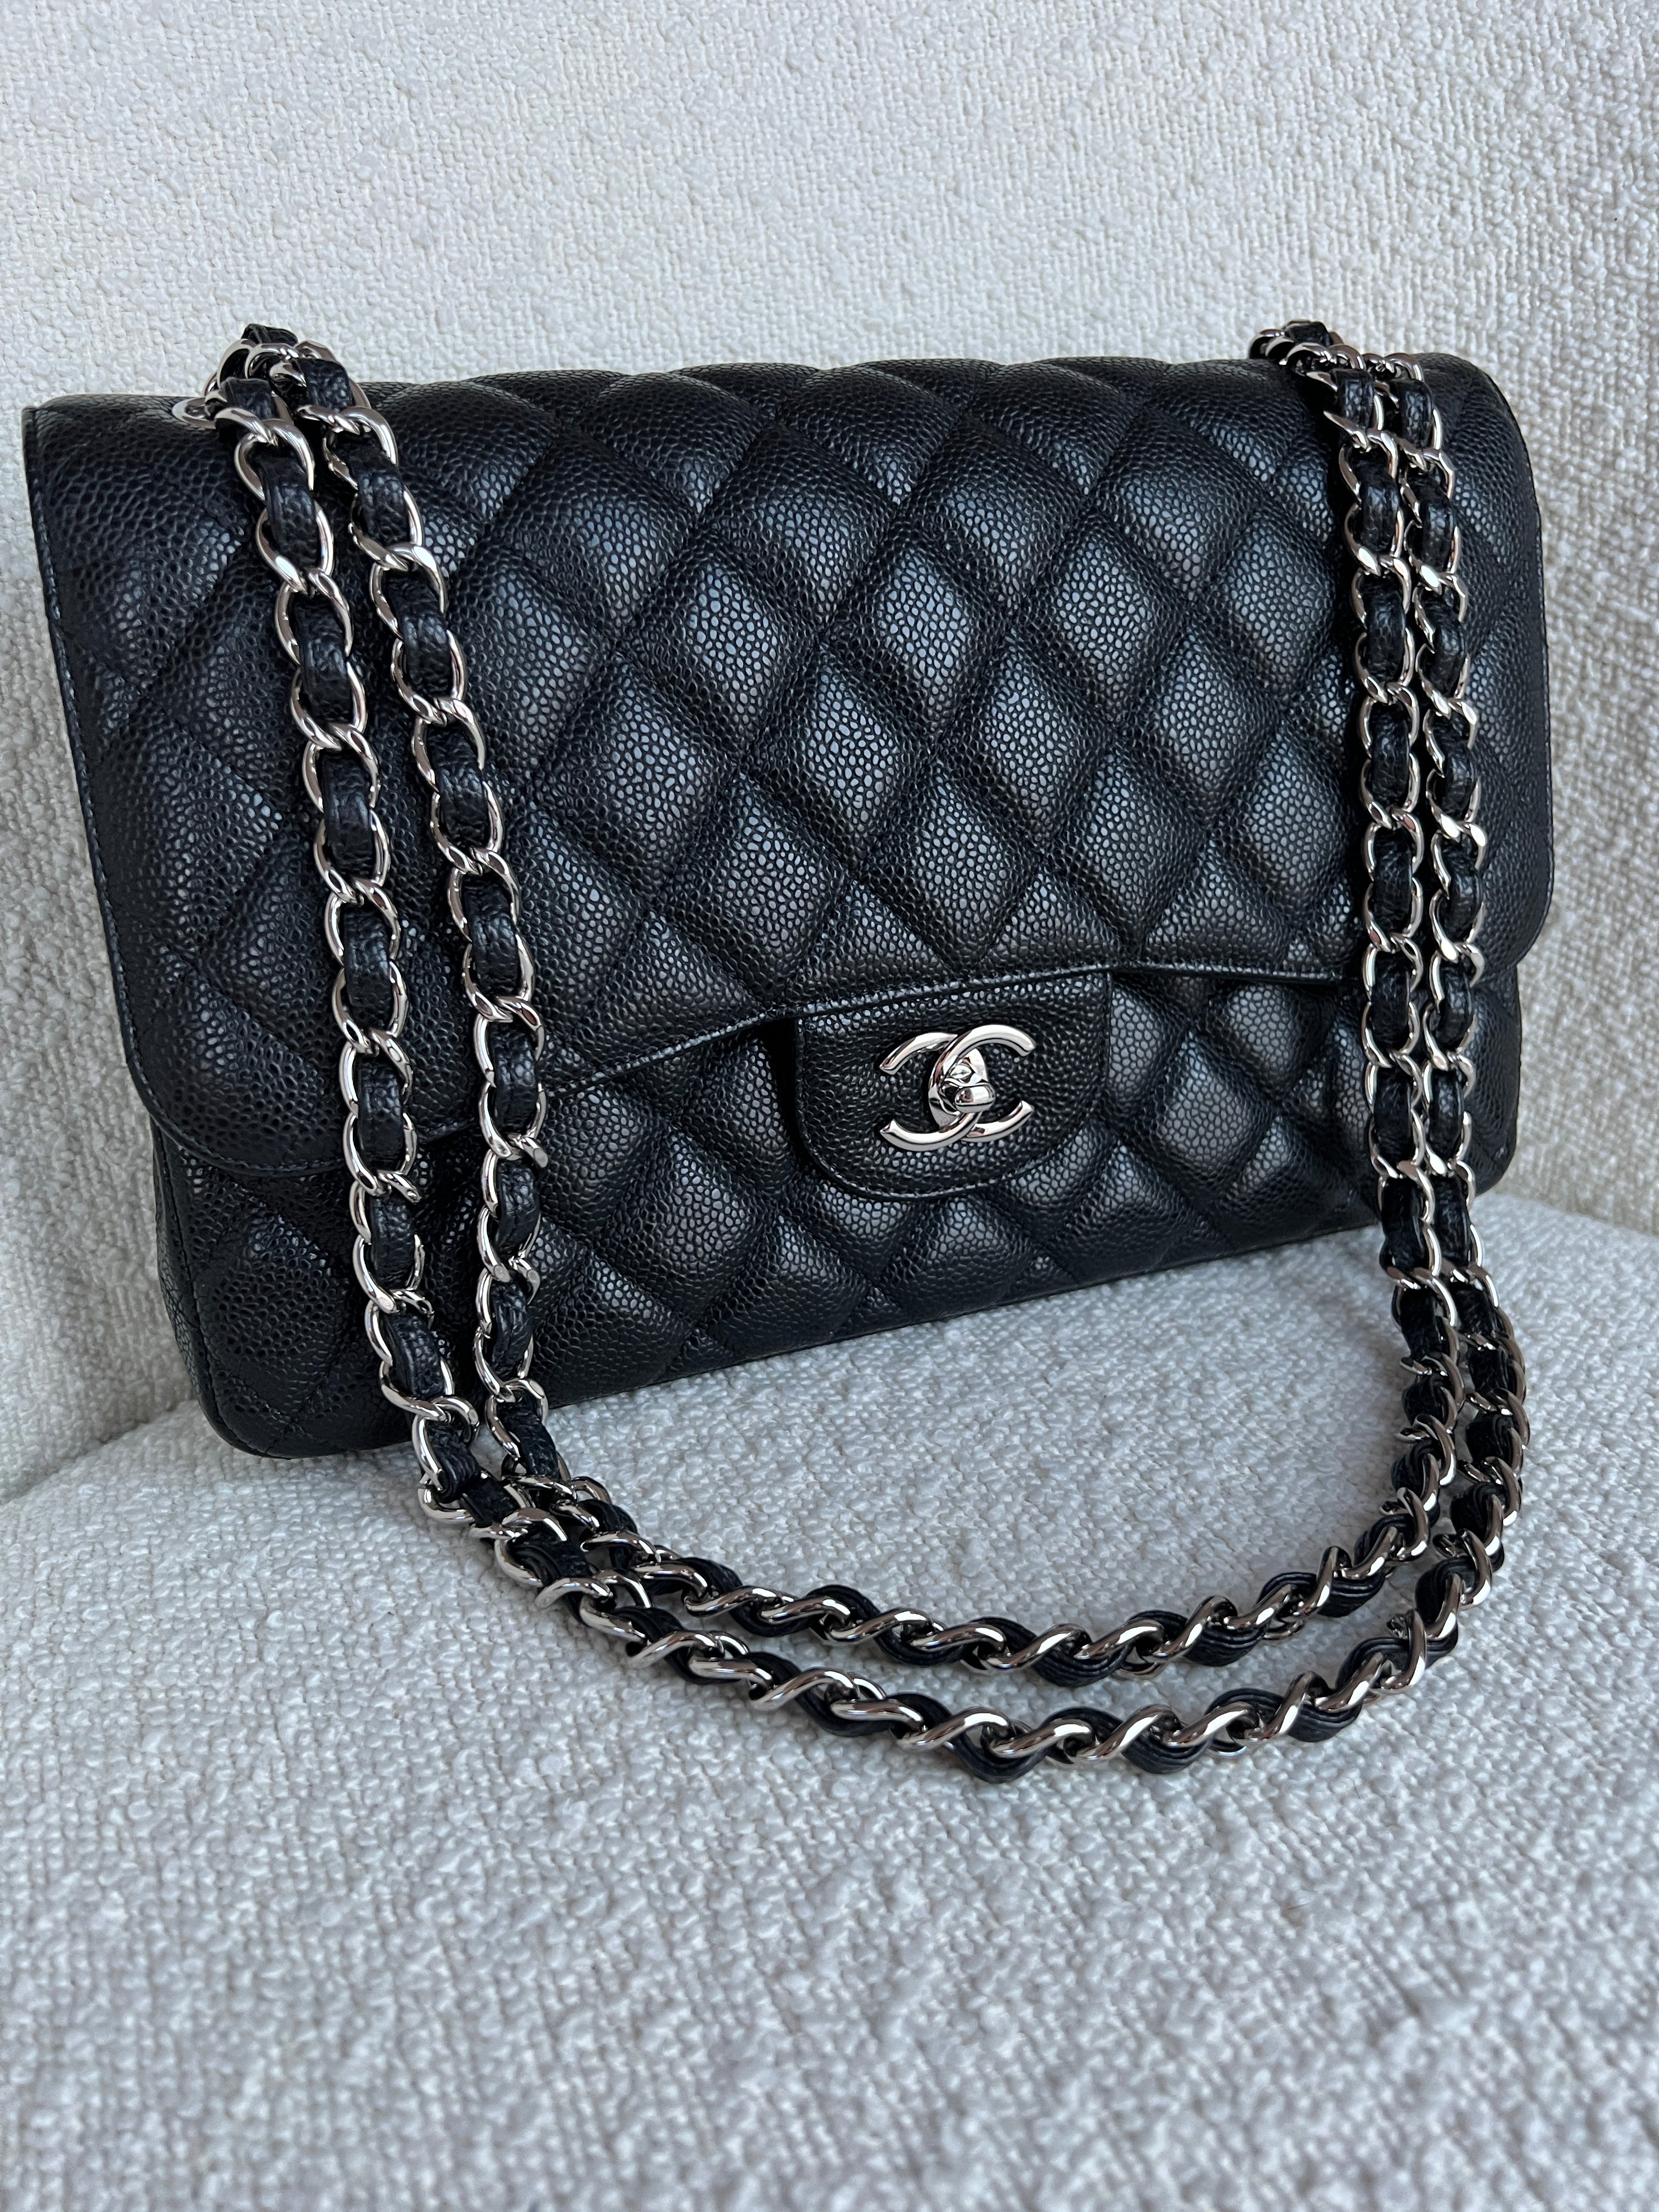 CHANEL Pocket in the City Jumbo Flap Caviar Chain Convertible